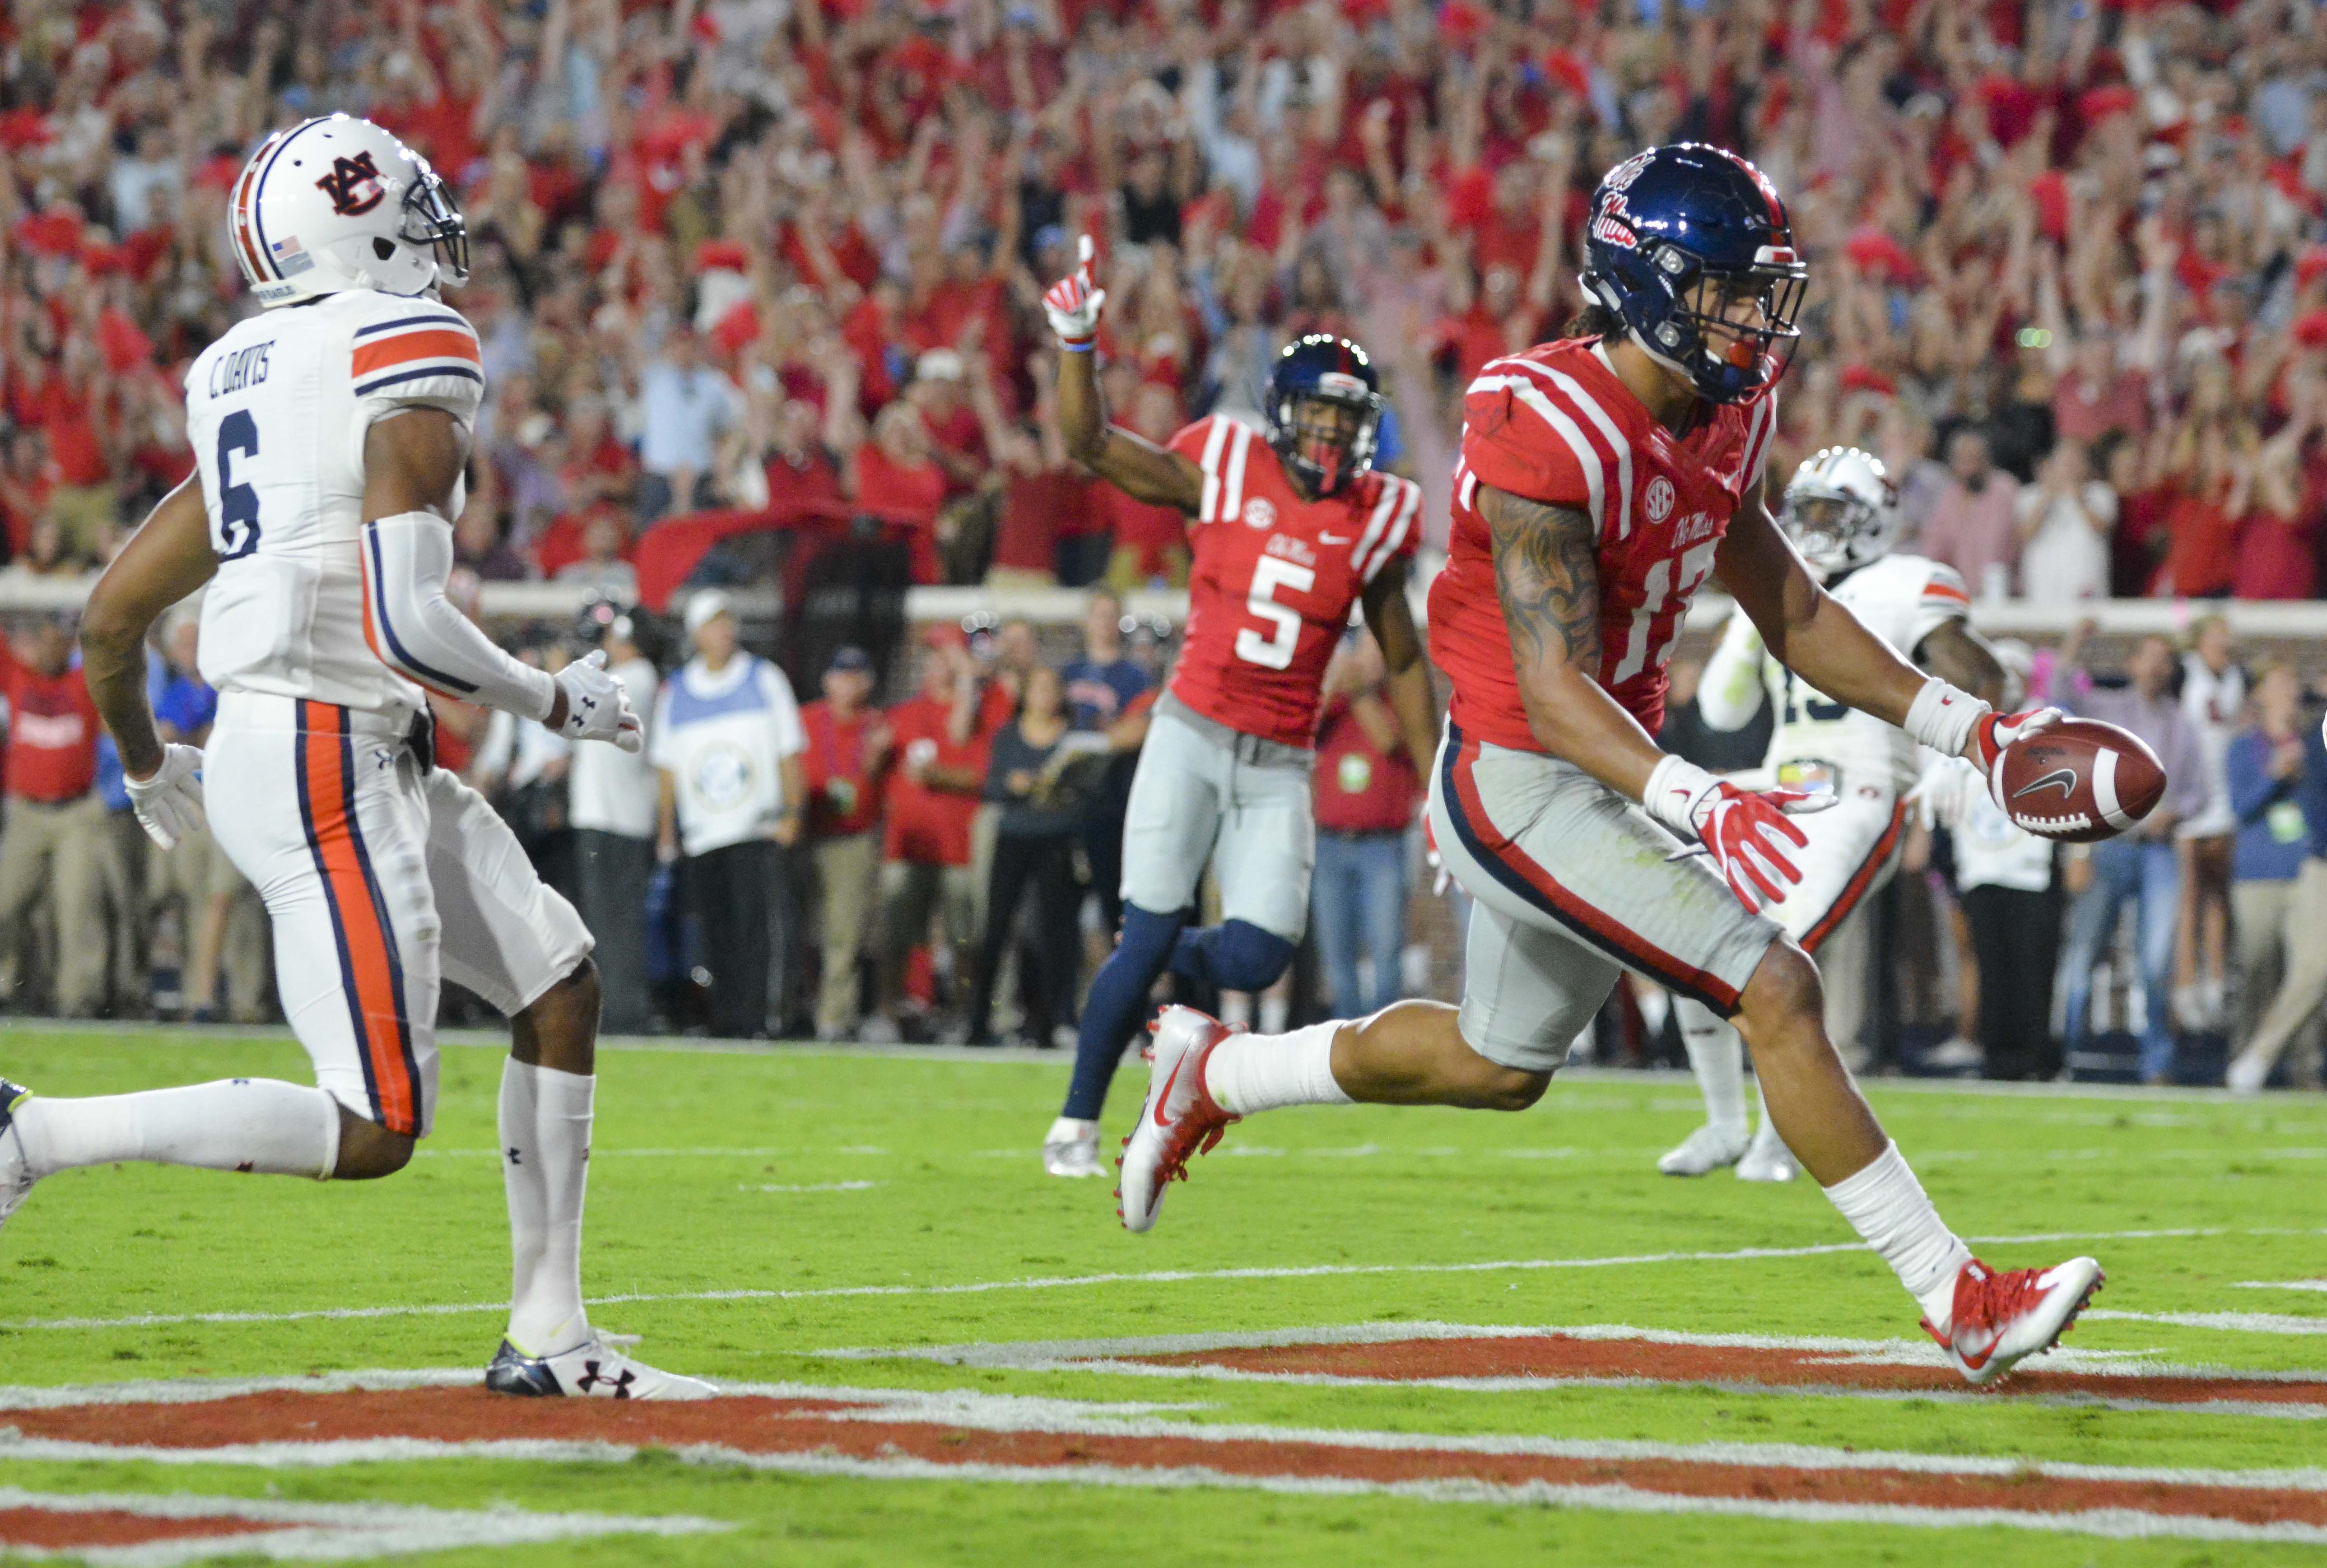 Oct 29, 2016; Oxford, MS, USA; Mississippi Rebels tight end Evan Engram (17) scores a touchdown during the first quarter of the game against the Auburn Tigers at Vaught-Hemingway Stadium. Mandatory Credit: Matt Bush-USA TODAY Sports